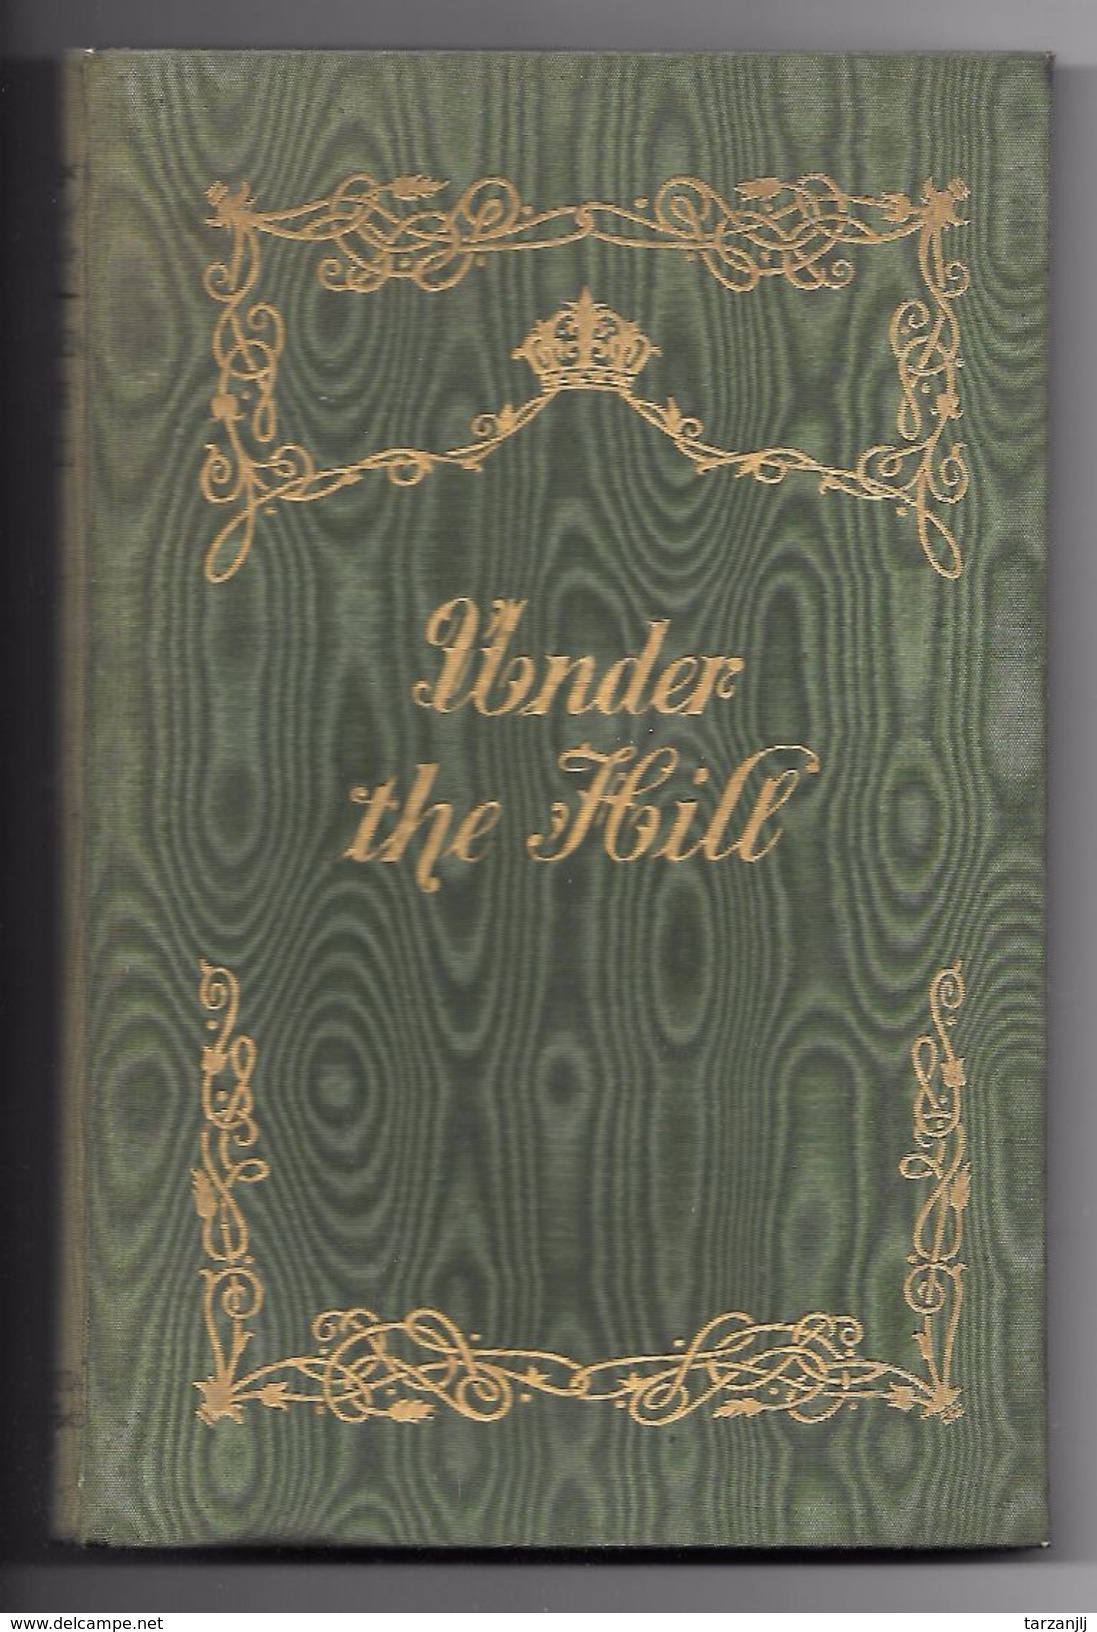 Livre Numéroté "Under The Hill" The Story Of Venus And Tannhauser By Aubrey Beardsley (Completed By John Glassco) 1959 - Poésie